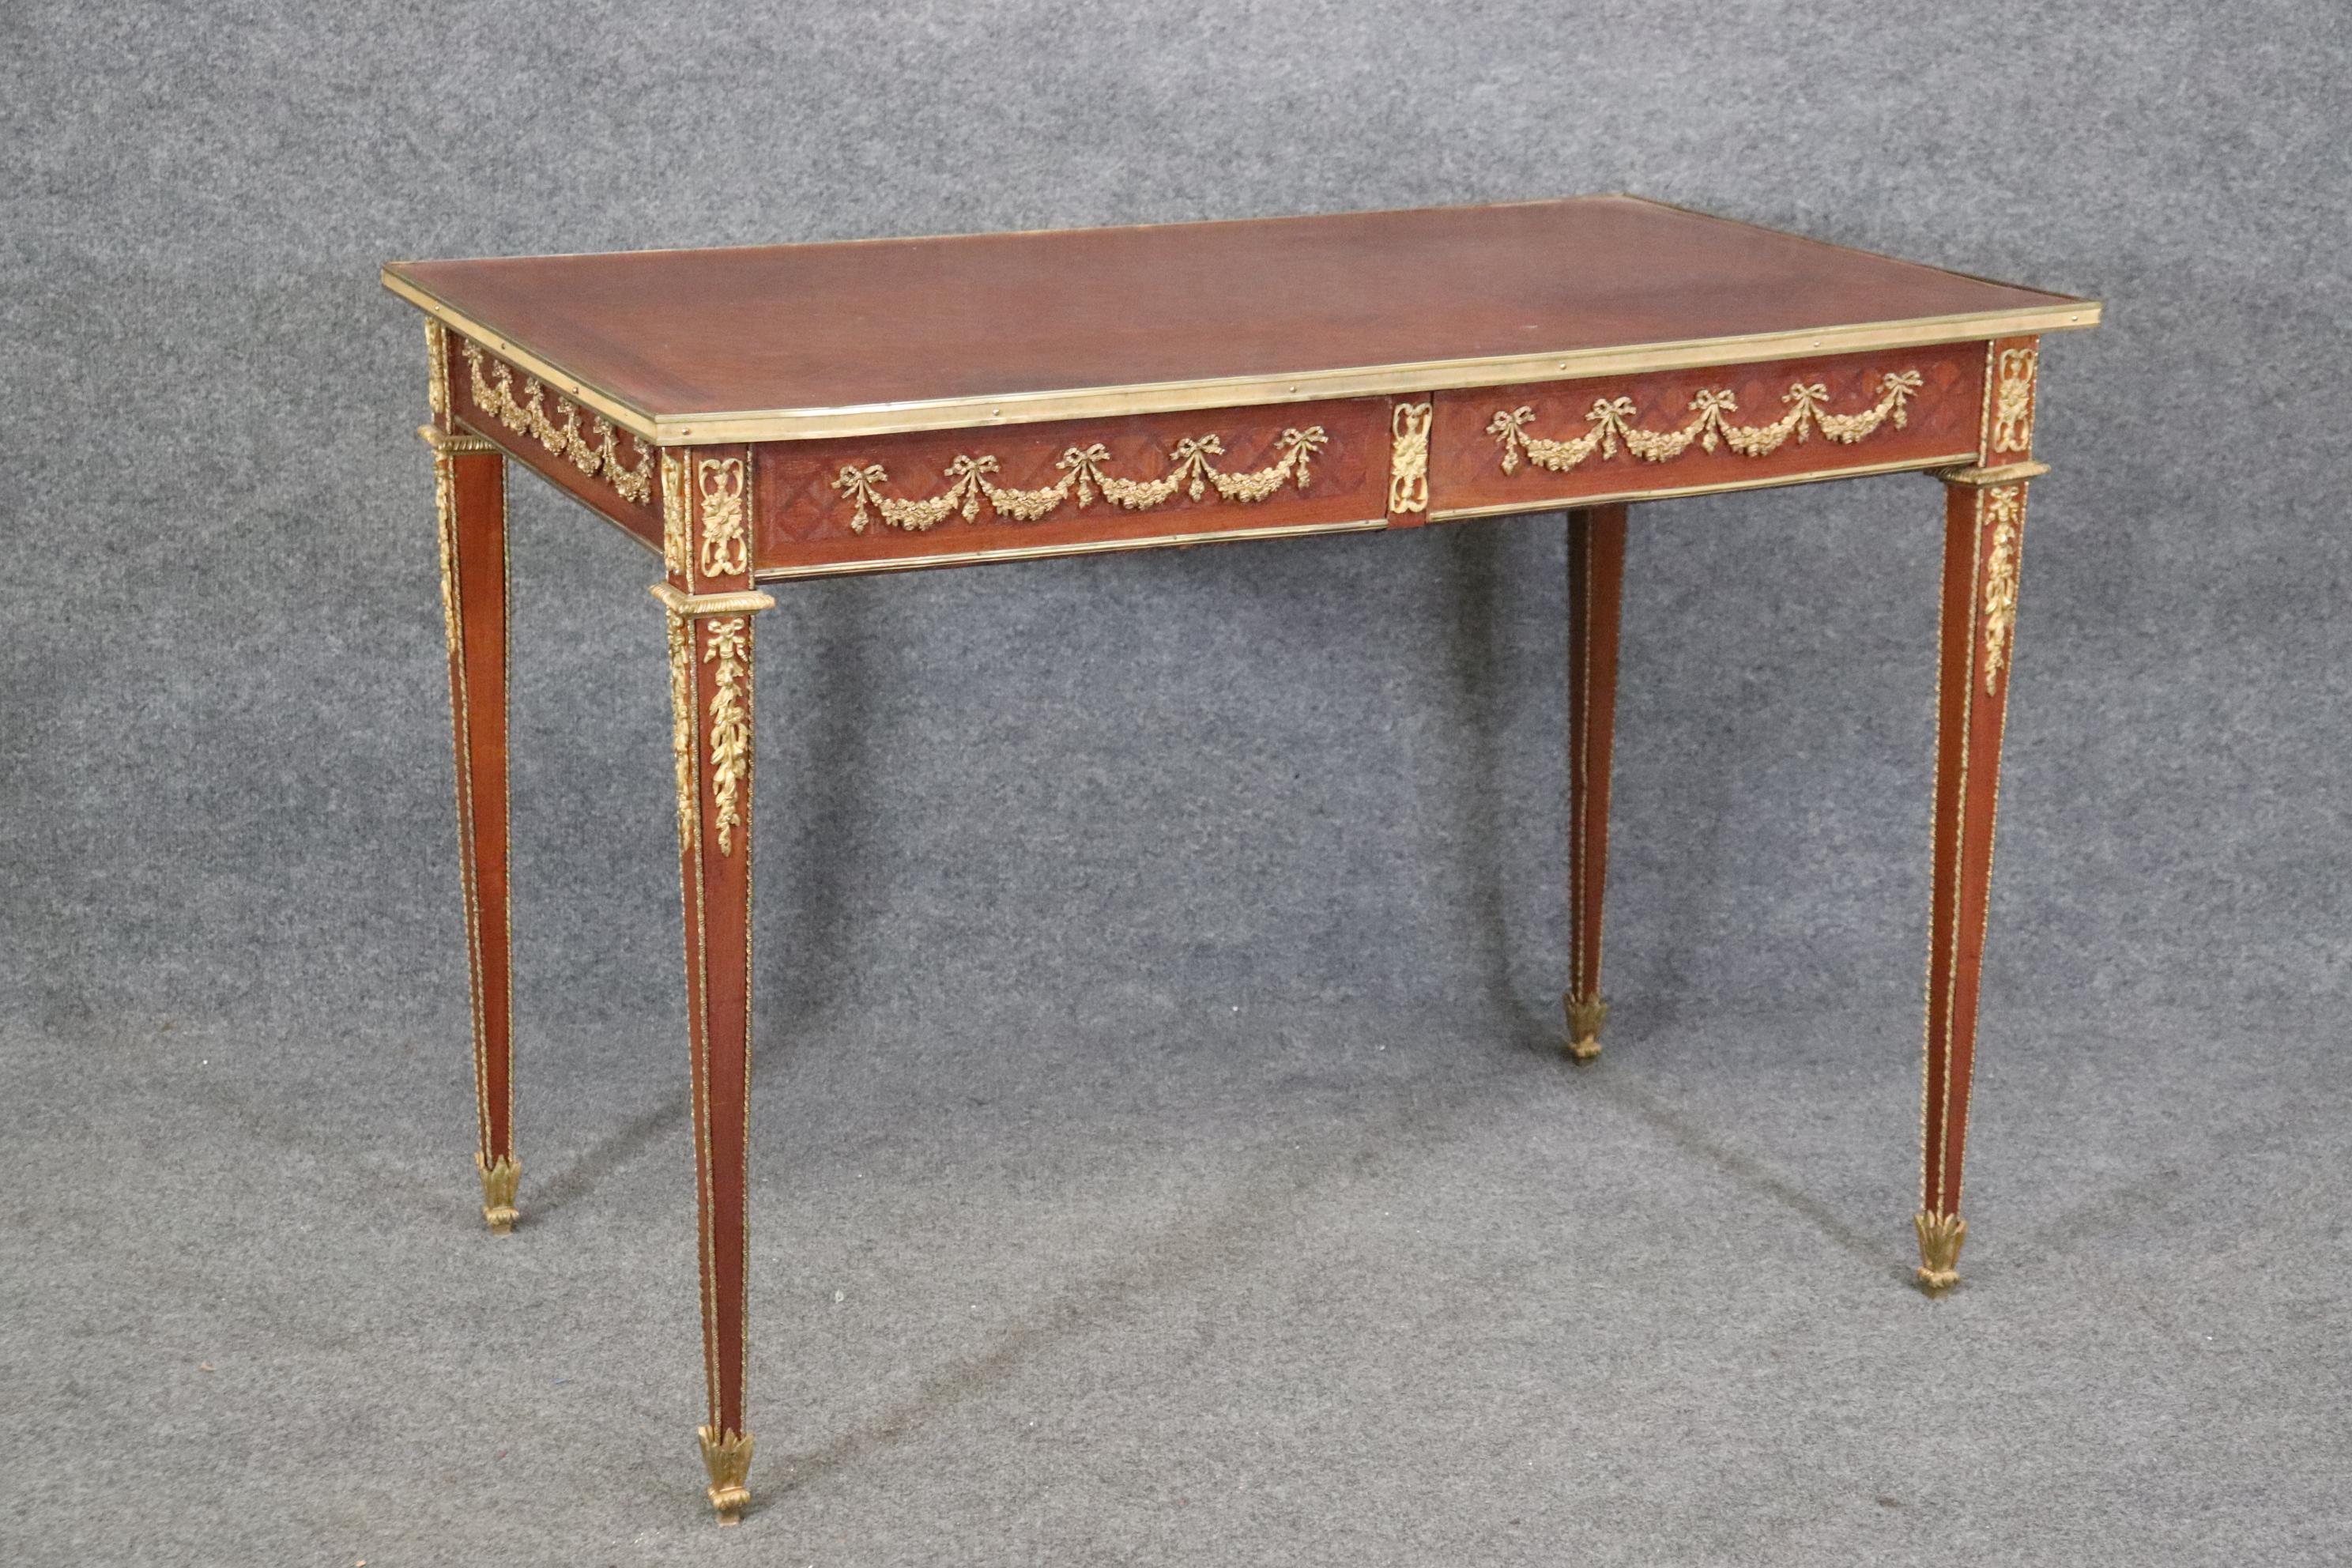 This desk is absolutely stunning with gorgeous mahogany done in marquetry inlay and bright bronze ormolu that is crisp and extremely well defined. The desk has two drawers and wll show darker areas on top from age and use. The finish is an older